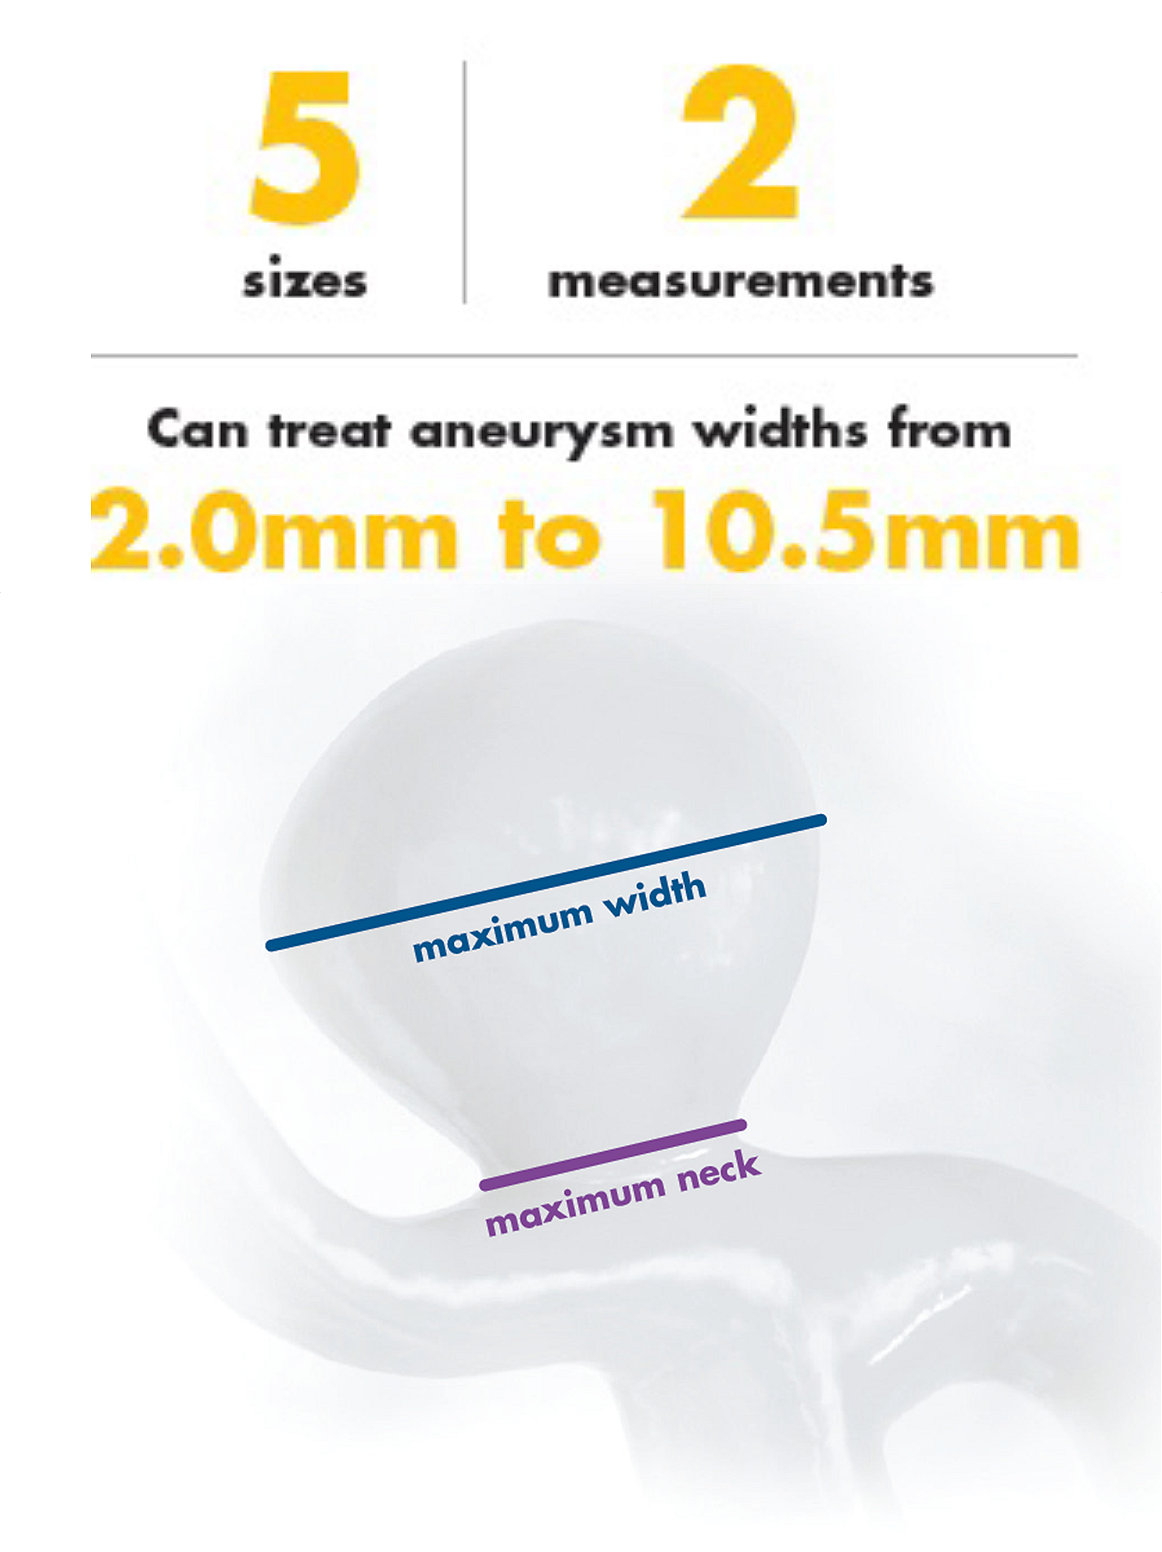 Size Simplified_Infographic copy